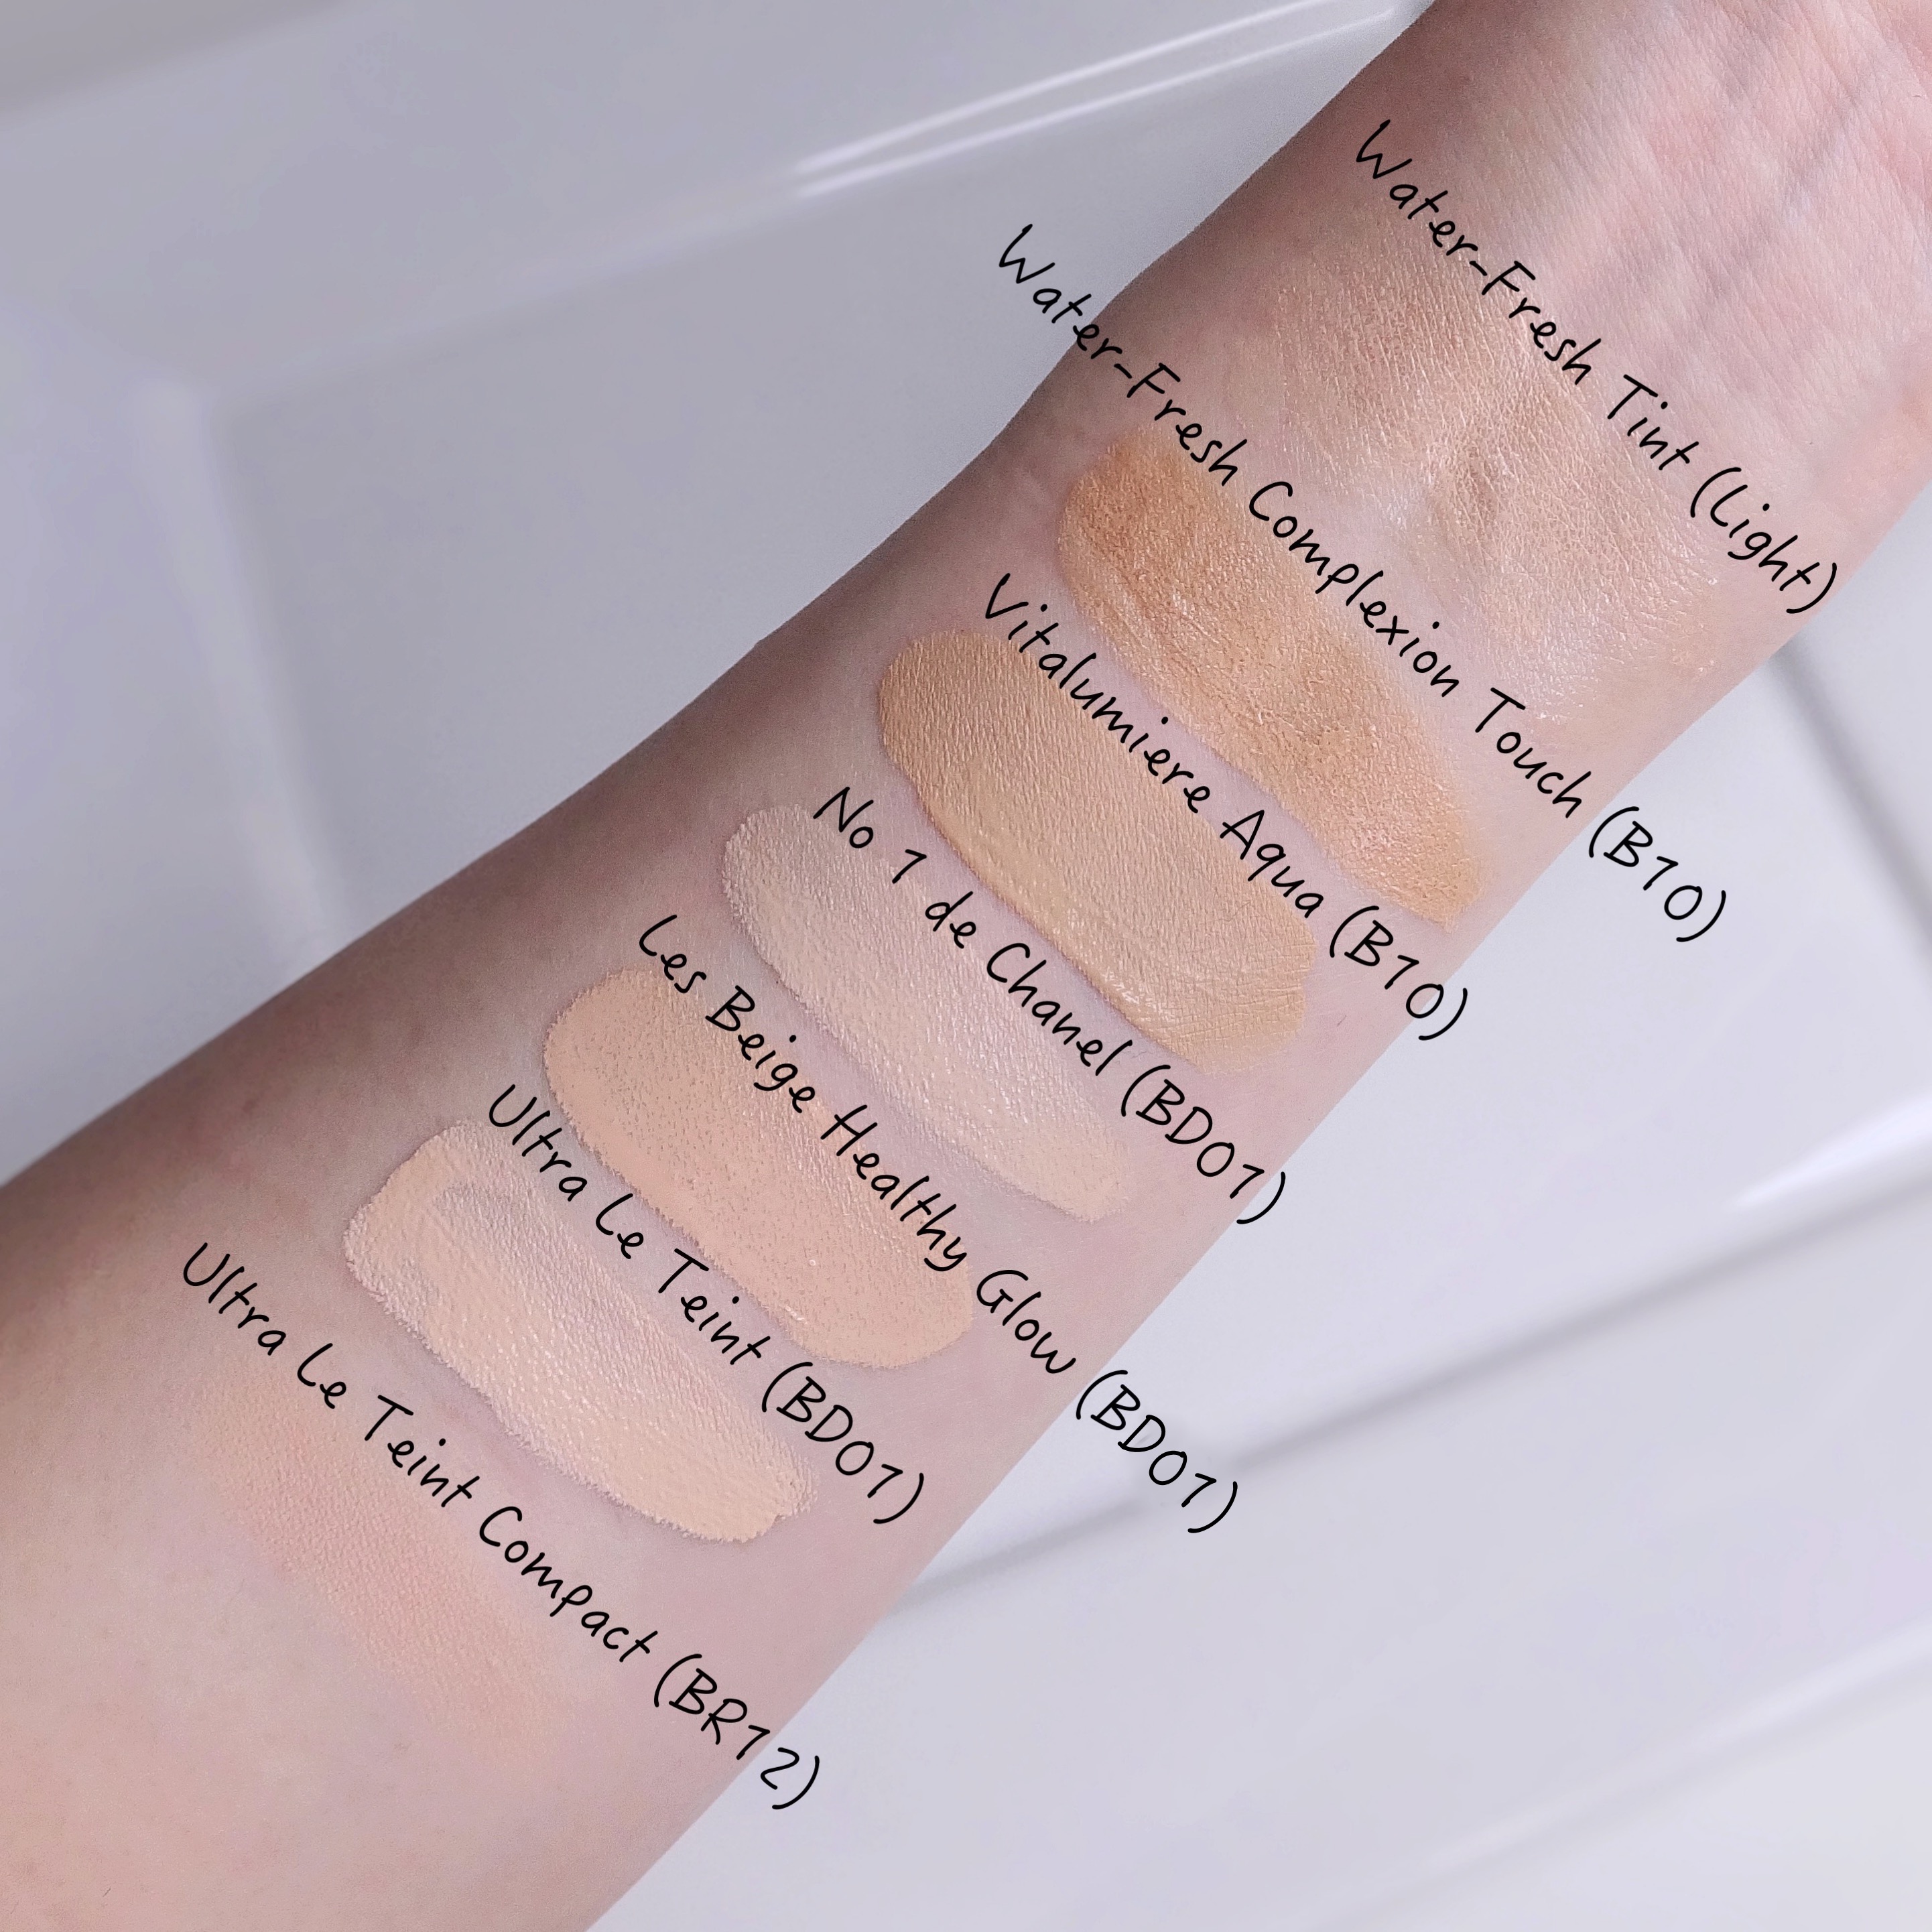 Chanel Foundation Reviews and Swatches